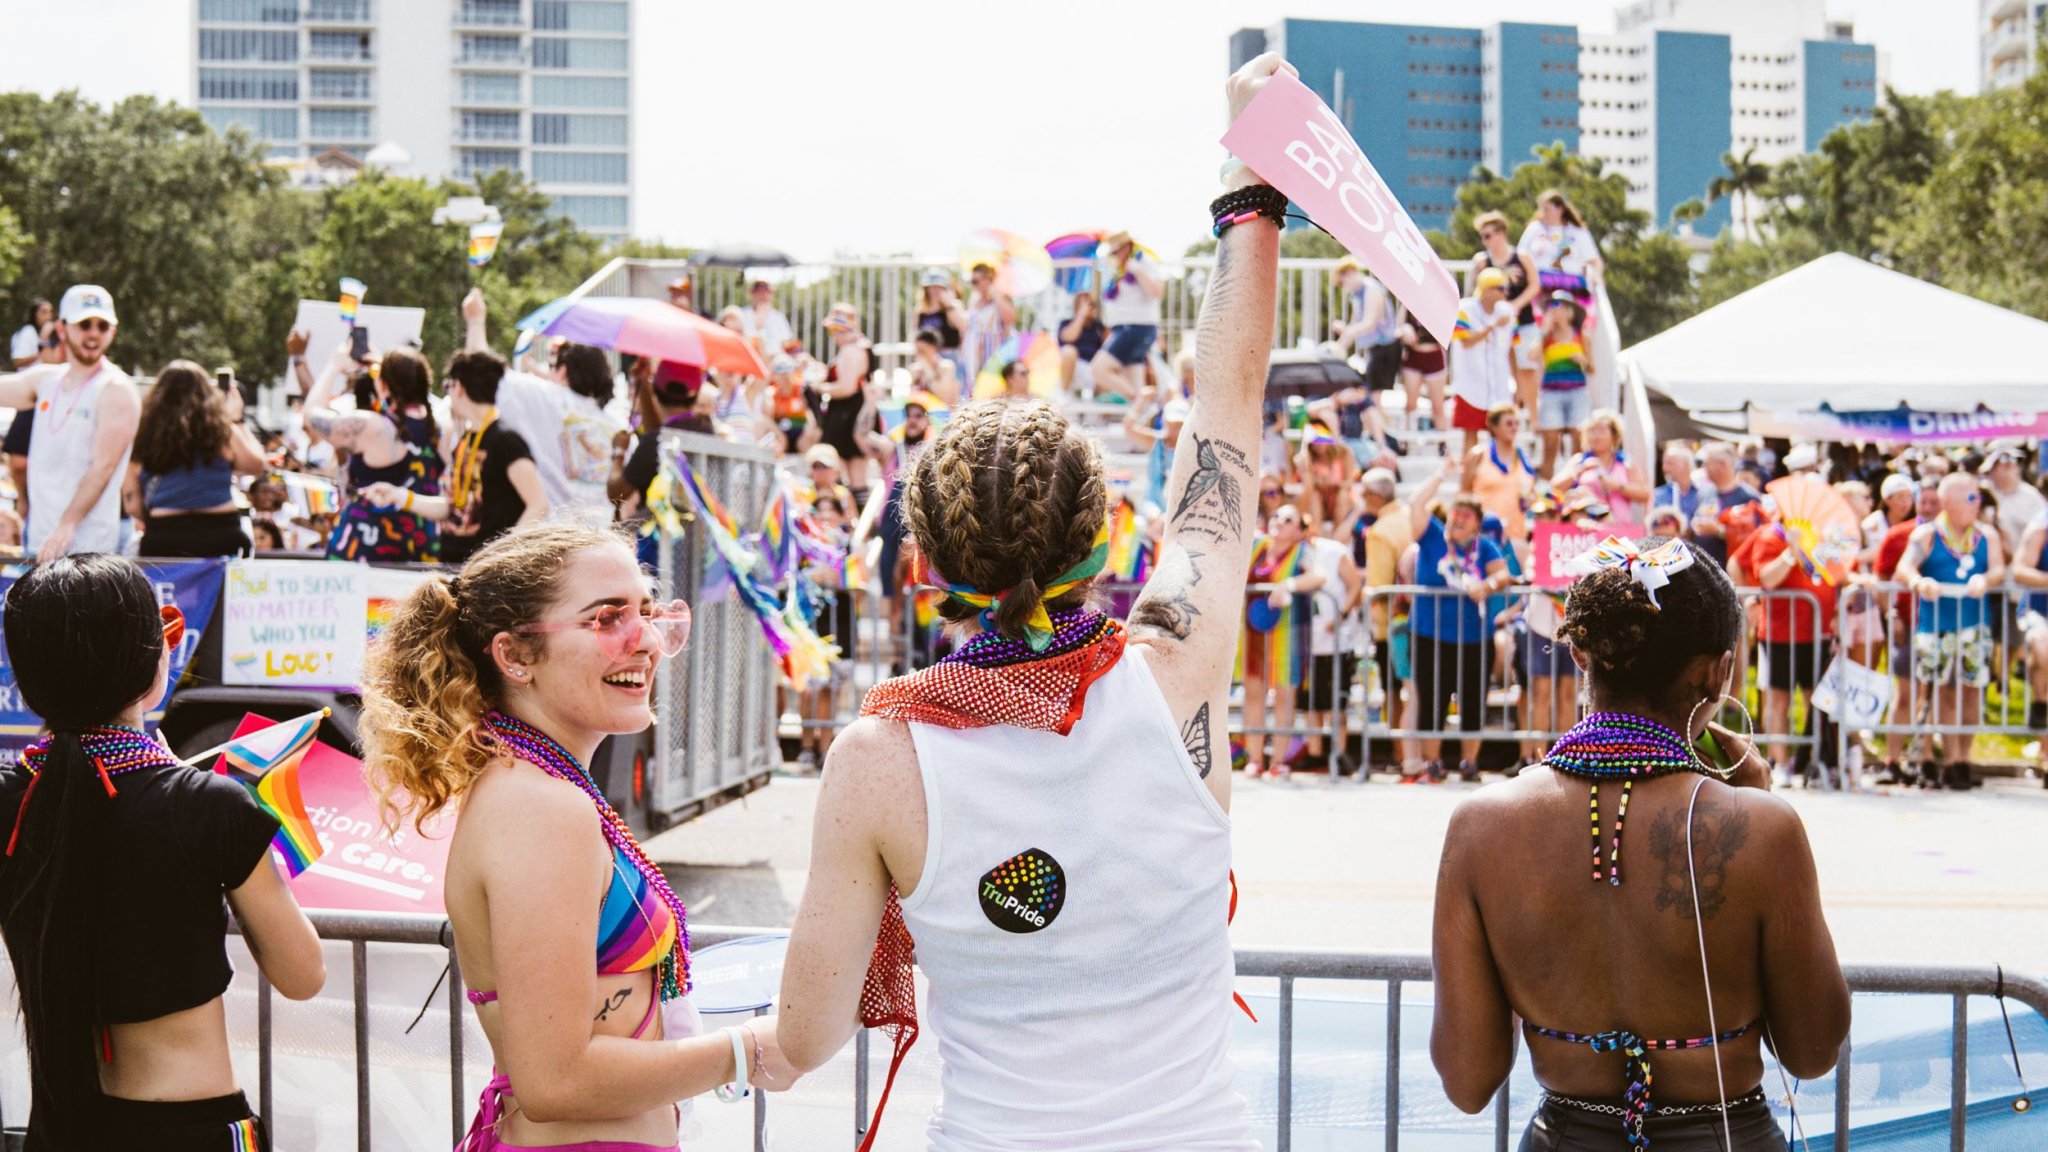 'We say gay': Florida’s largest Pride parade draws hundreds of thousands